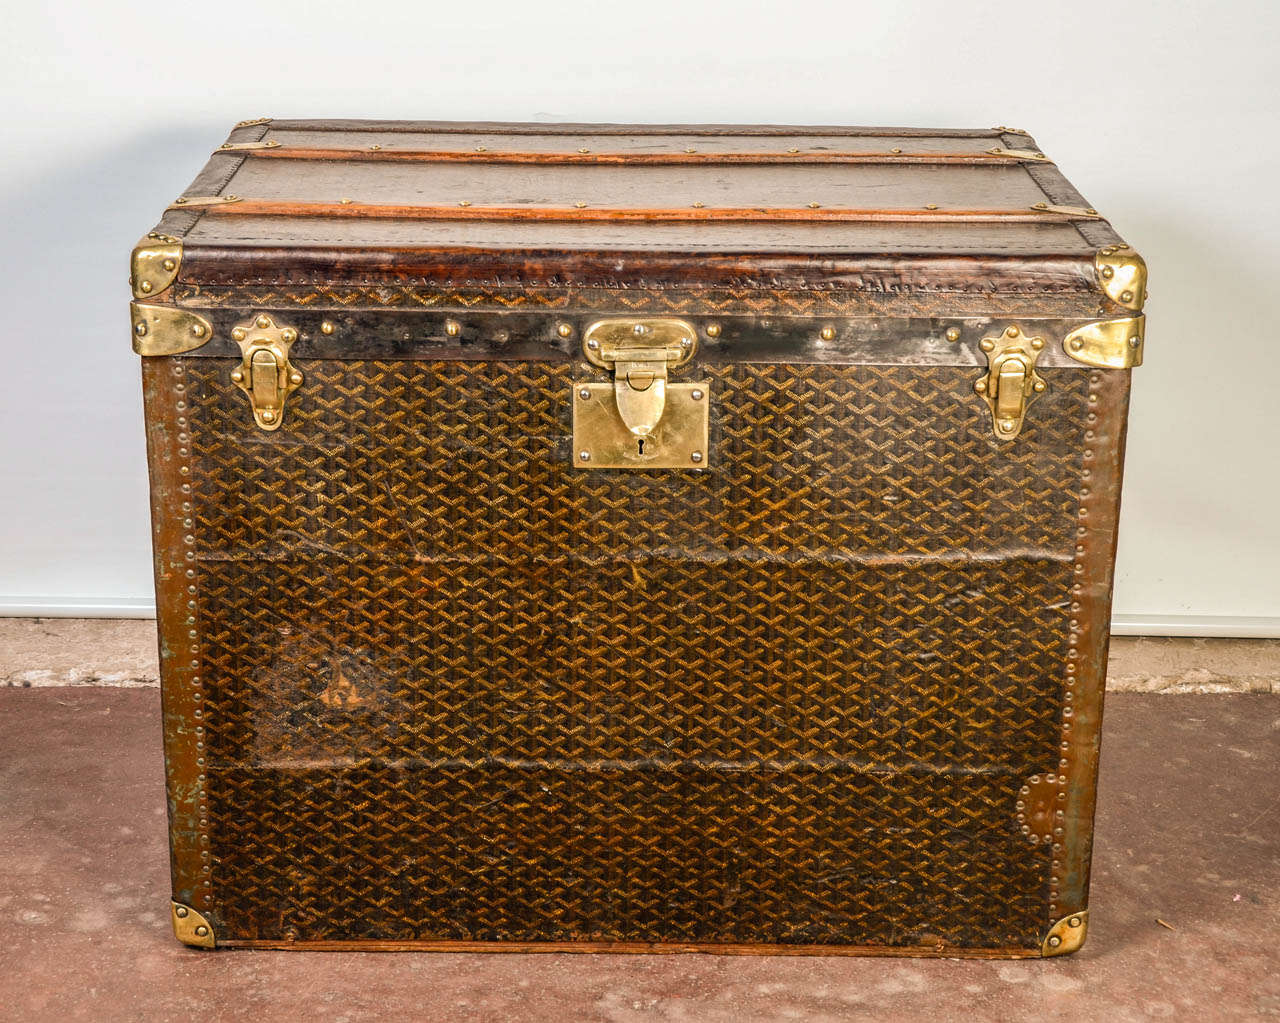 Magnificent vintage Goyard hat trunk.Outside features Goyard signature chevron canvas,leather trim and brass hardware.
Inside is in good original condition,only the top has been relined.
It still has its original sticker and original webbed basket.